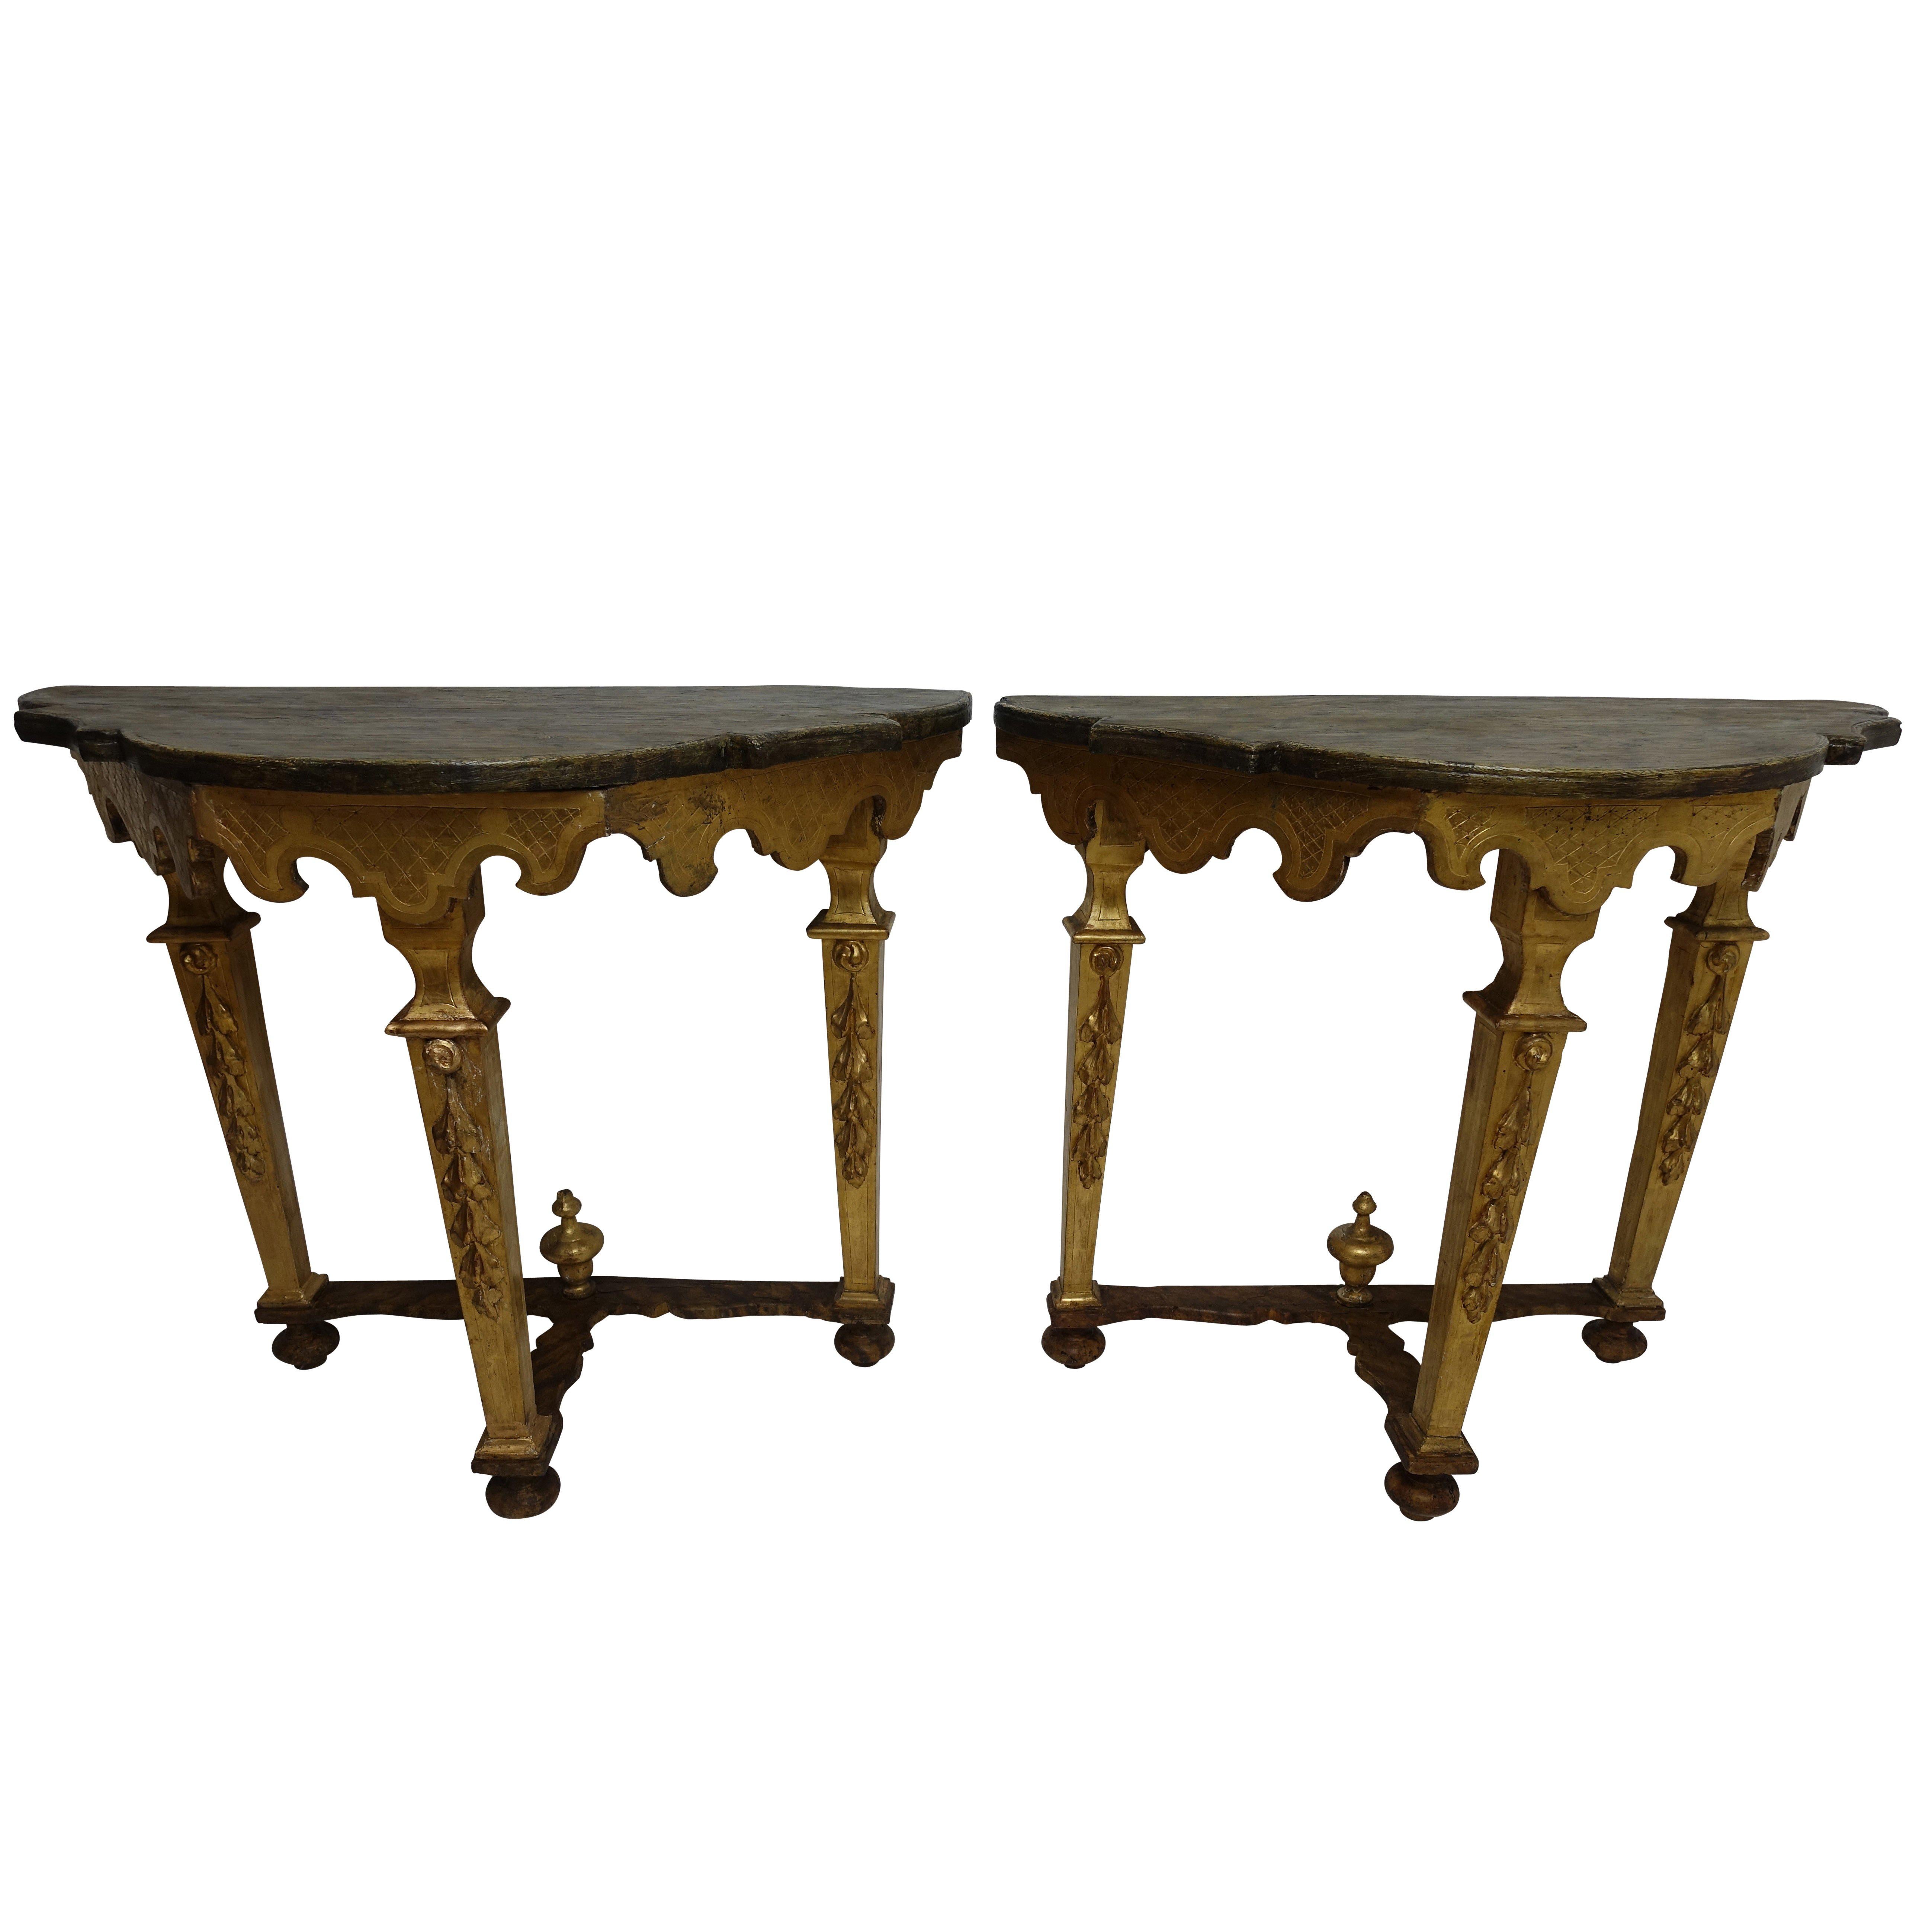 Pair of Florentine Style Carved and Painted Consoles, Italian, 18th Century